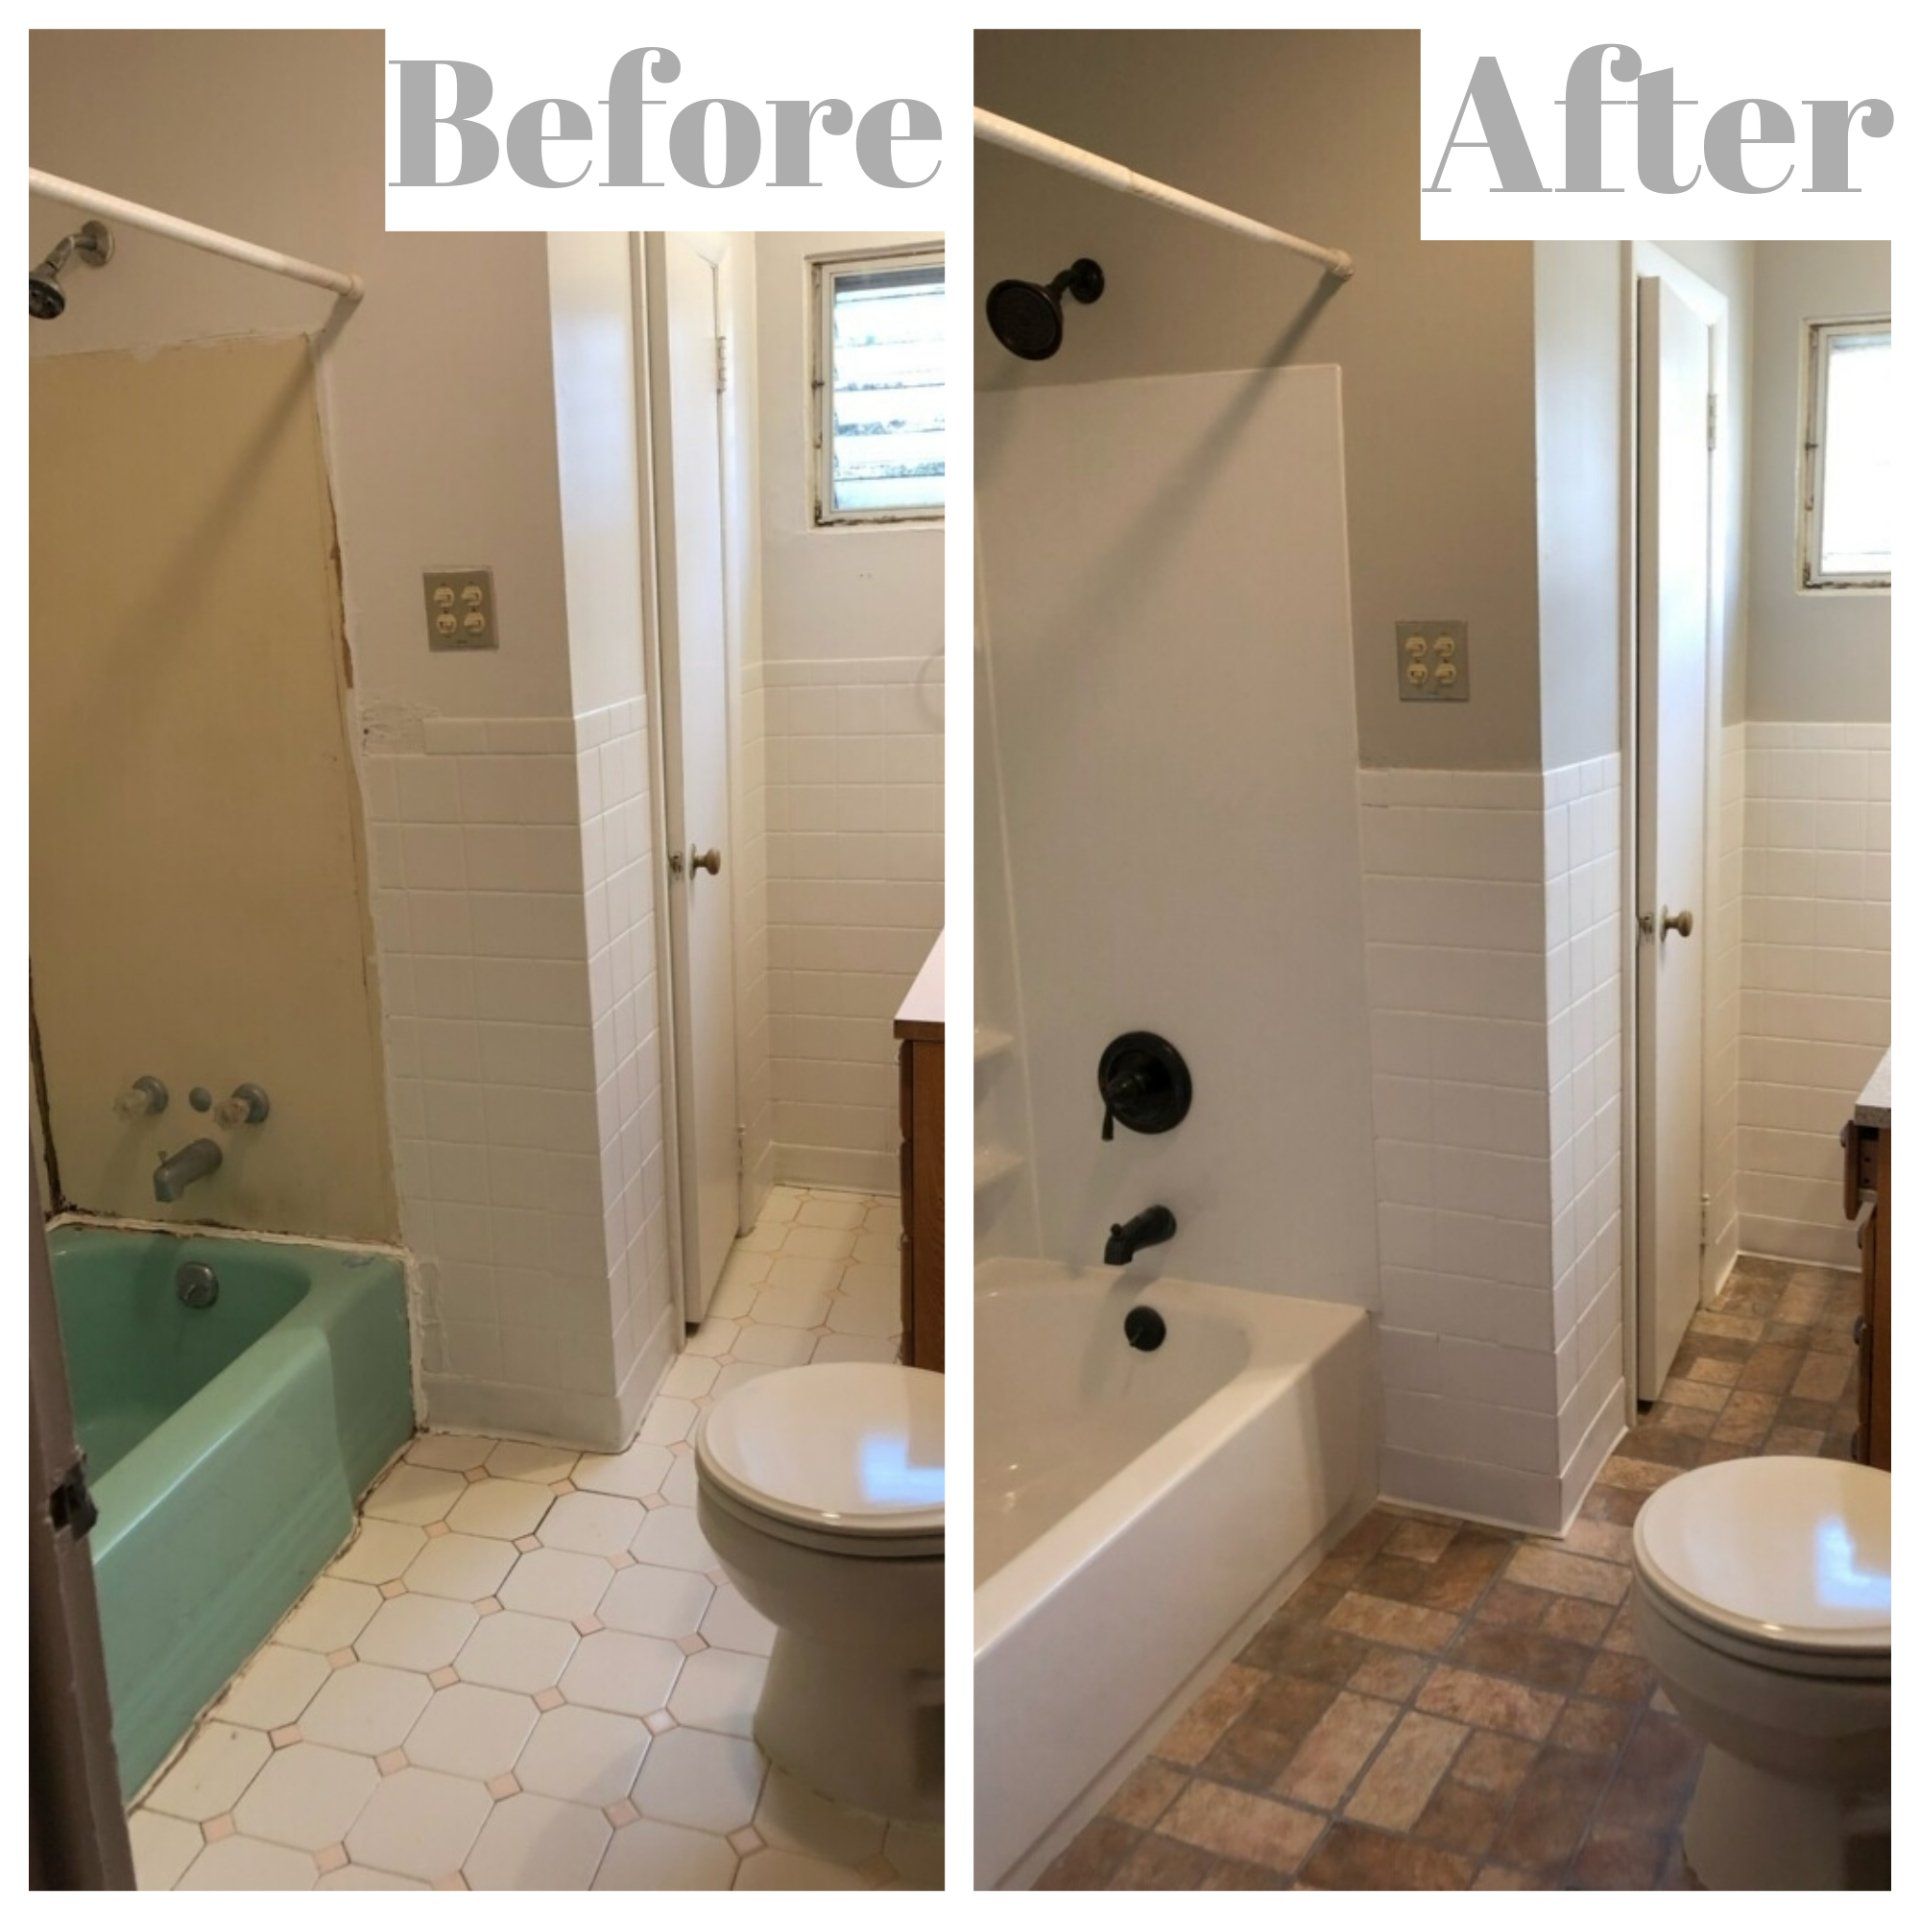 before and after photo comparison of new bathtub, new tile flooring bath fixtures and paint in Glenside bathroom remodel